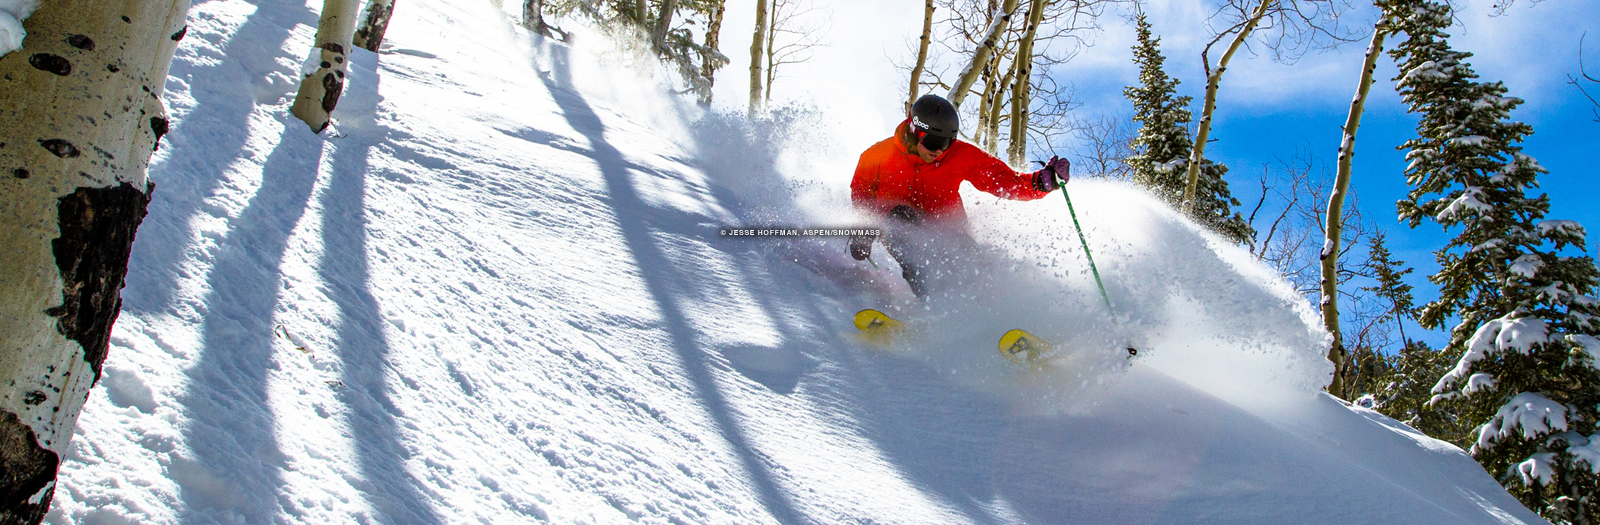 guide to expert skiing in snowmass